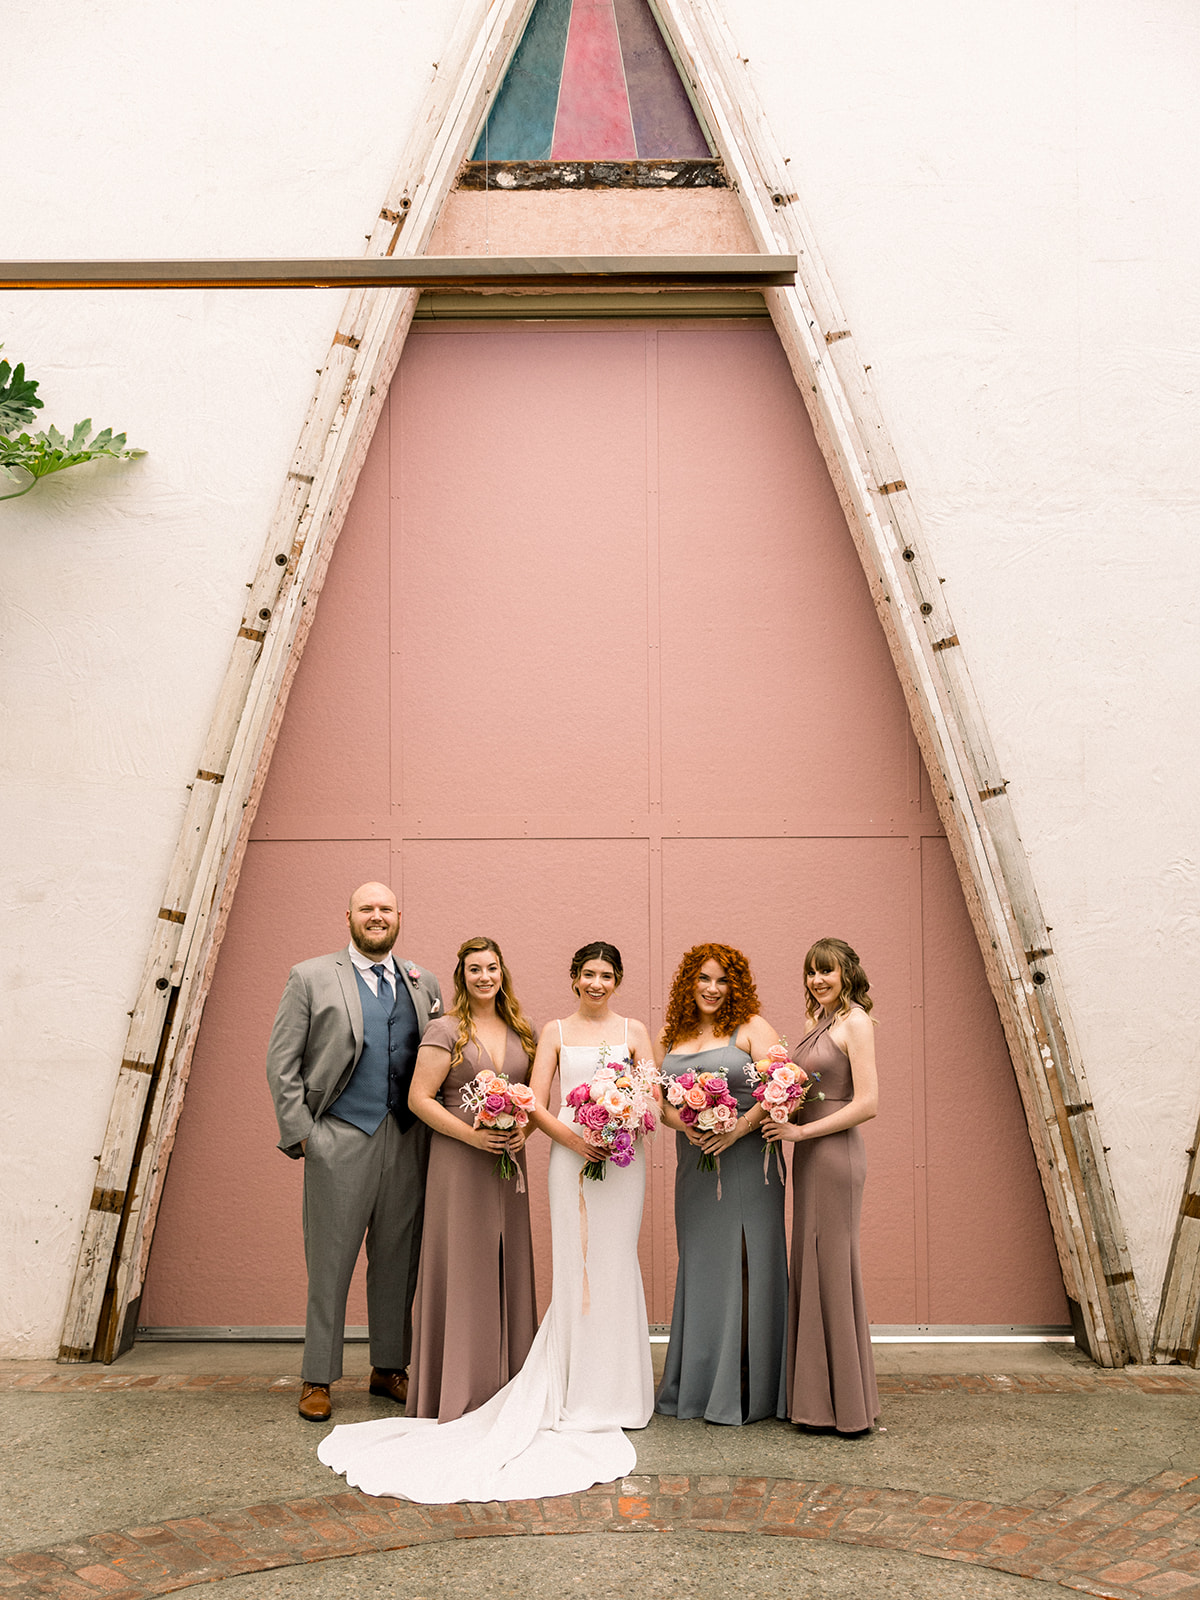 bride in contemporary wedding dress stands with wedding party in muted earth tone dresses and groomsman at The Grassroom DTLA